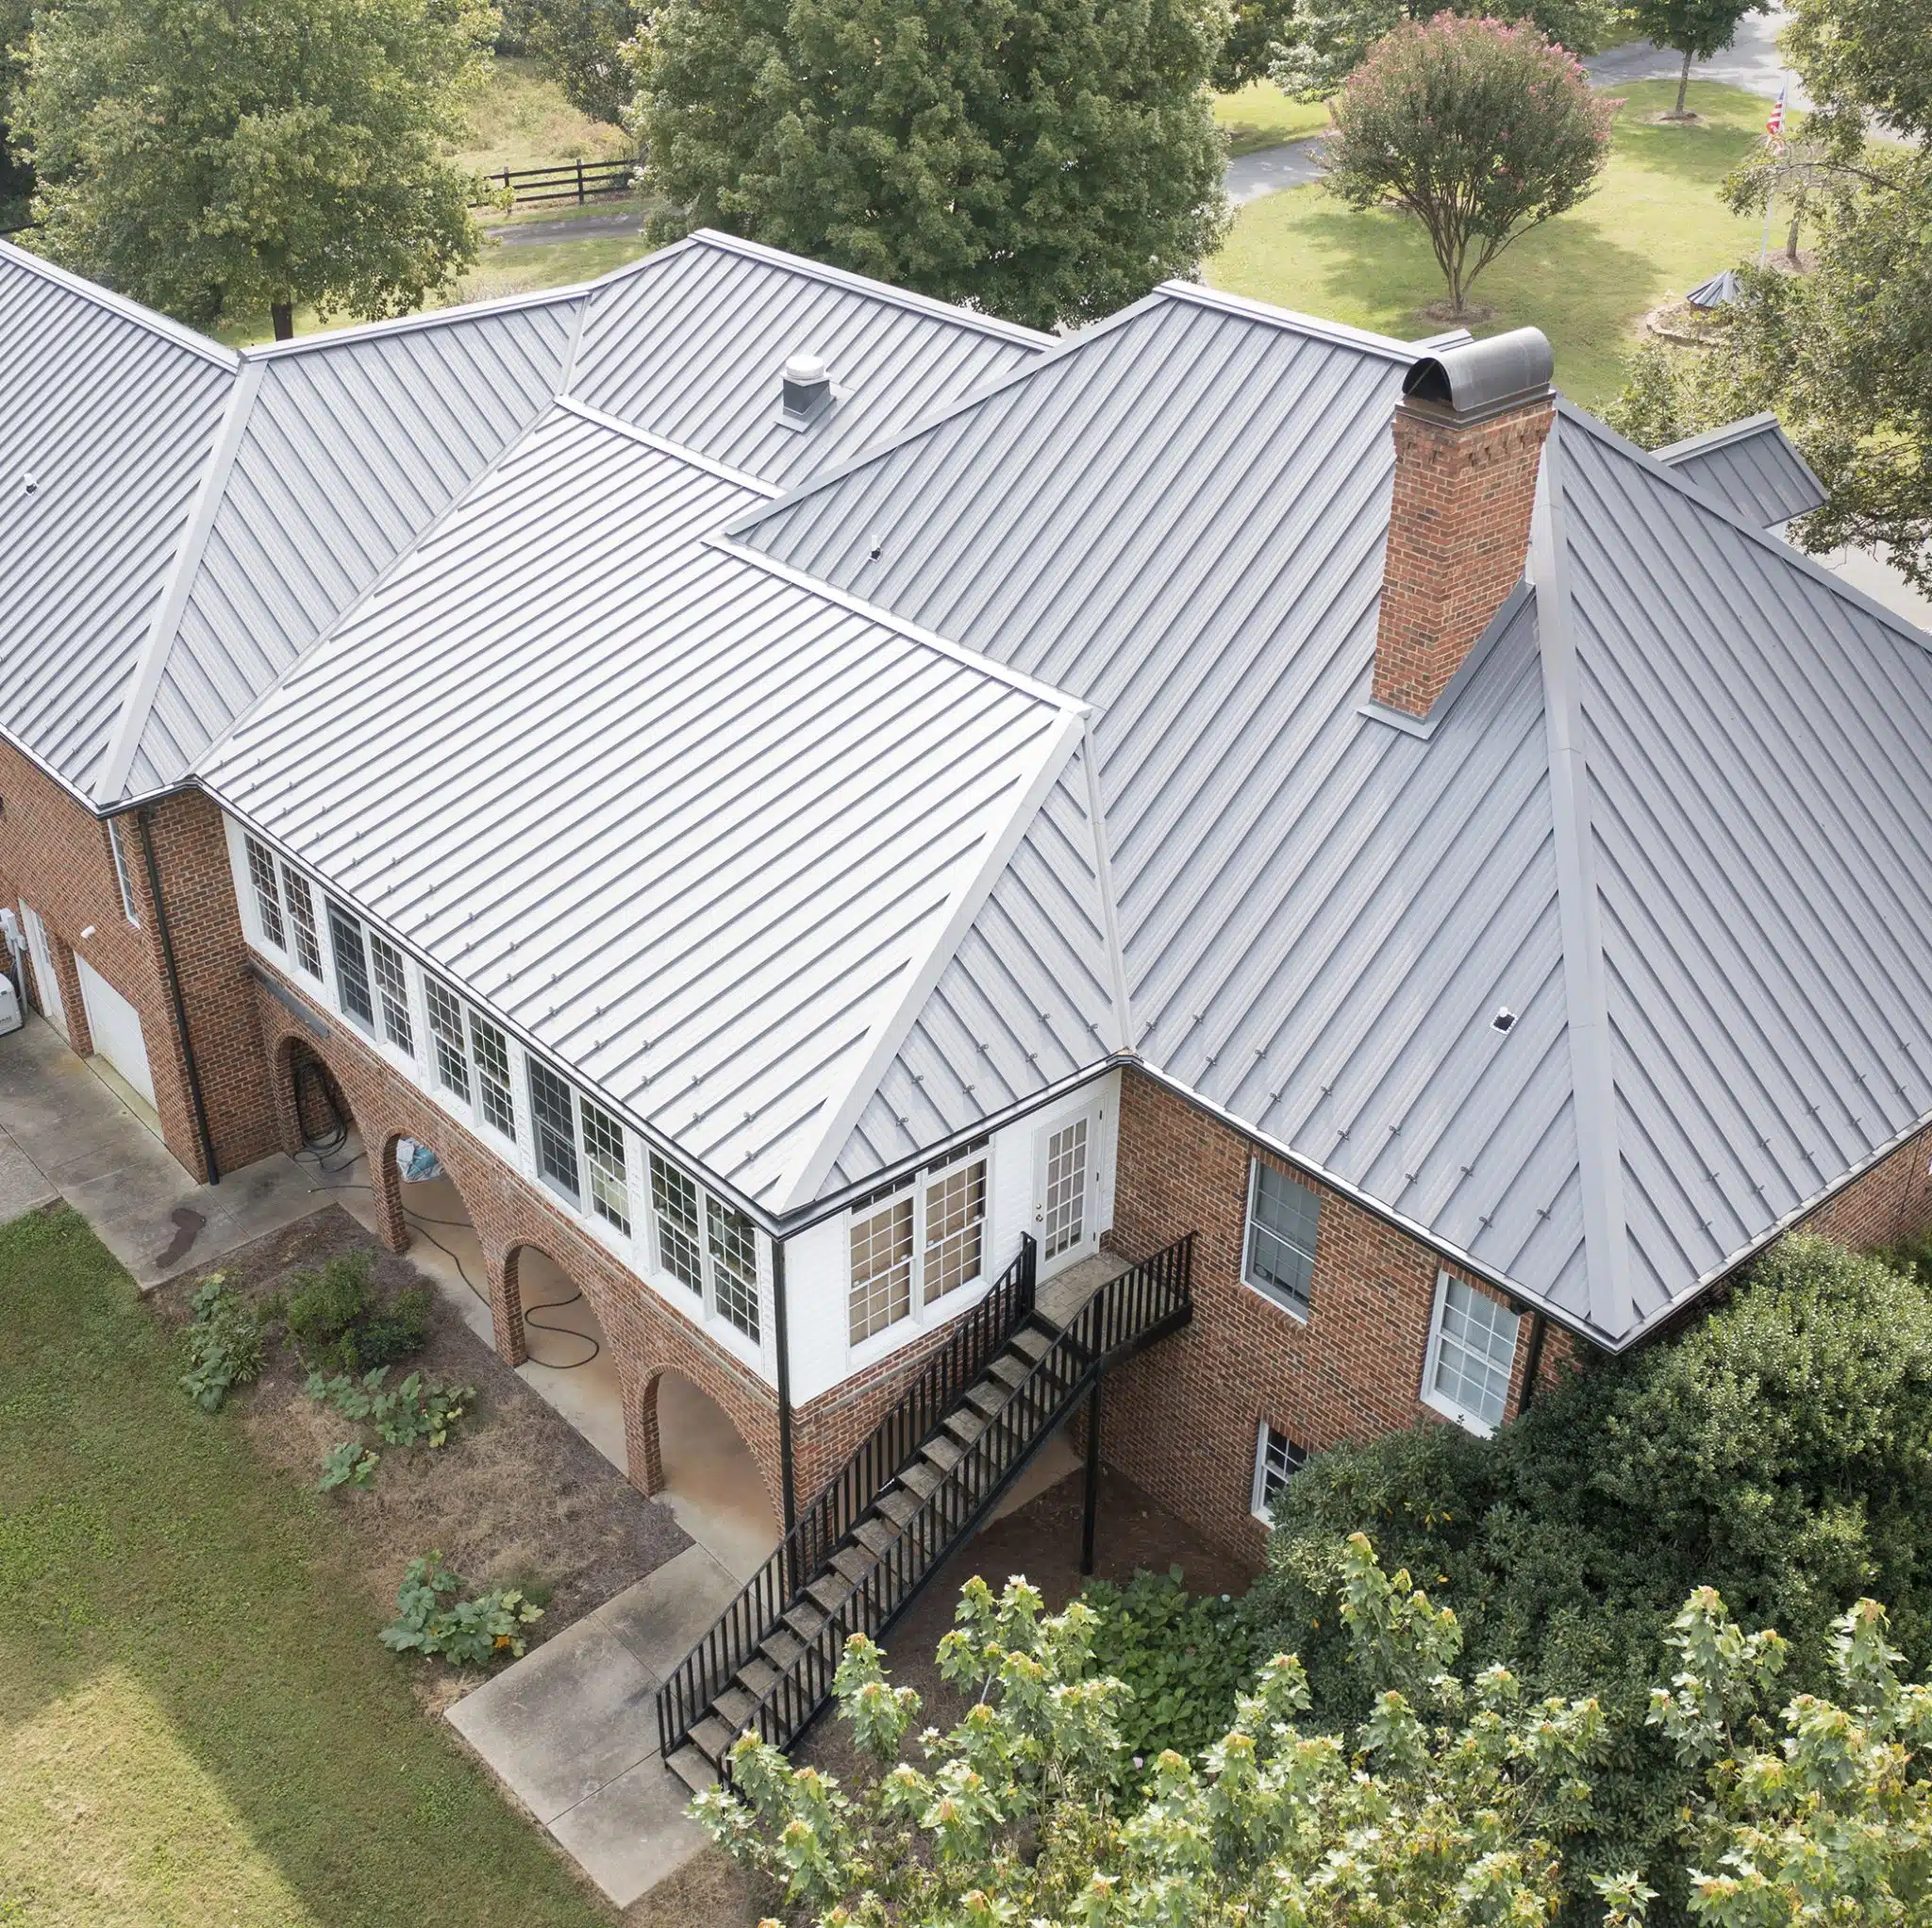 Residential Home with standing seam metal panels